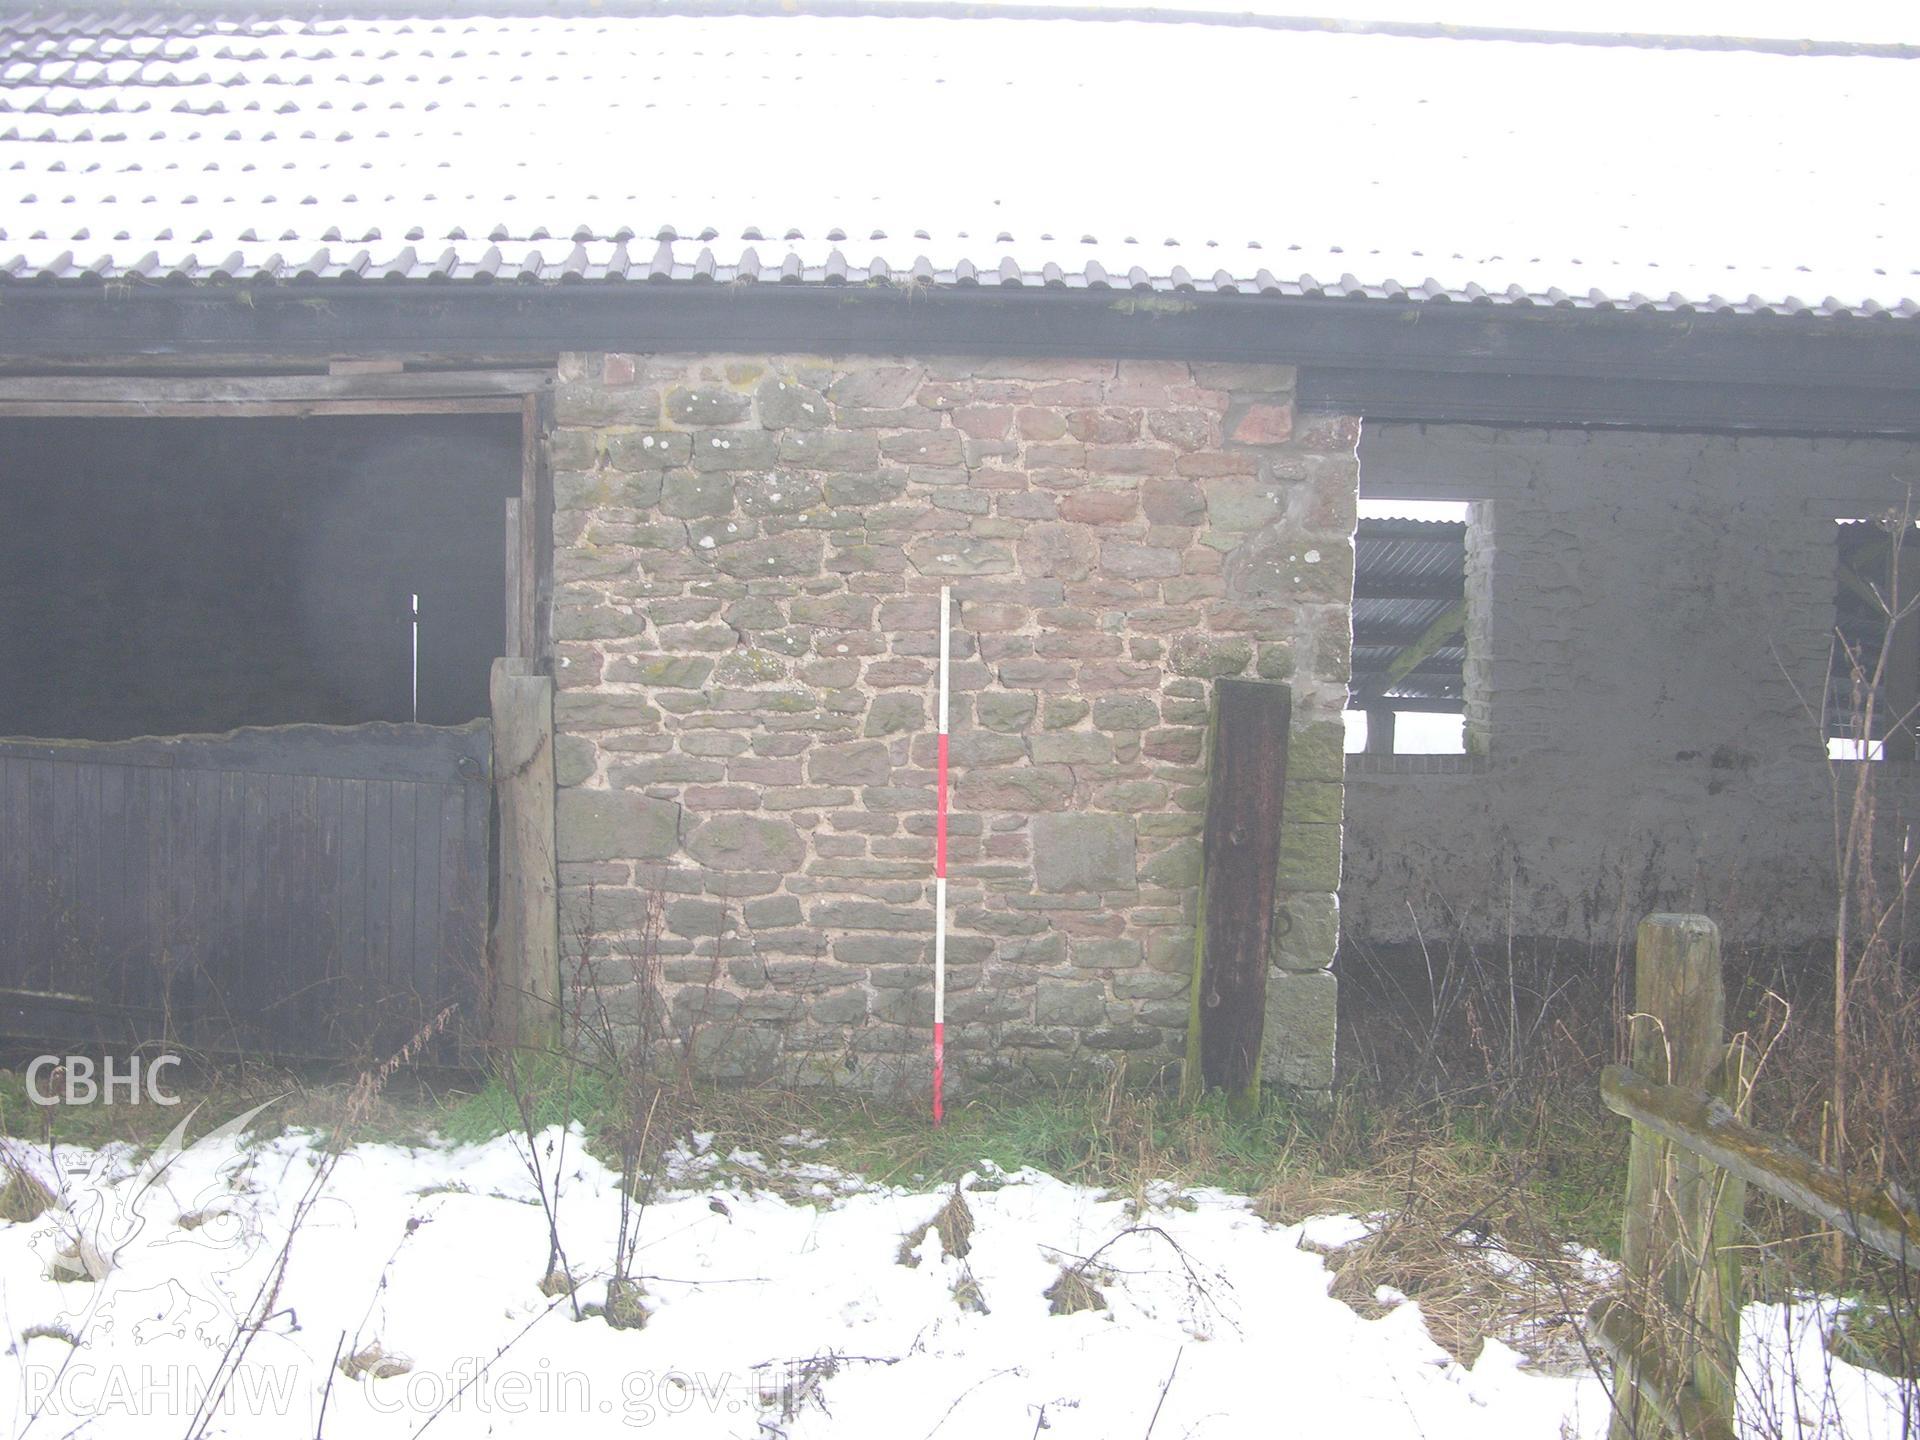 Digital photograph of a general view of the barns exterior, from an Archaeological Building Recording of Hillside Barn, Llanvaches, Monmouthshire, which was conducted by Cambrian Archaeological Projects.